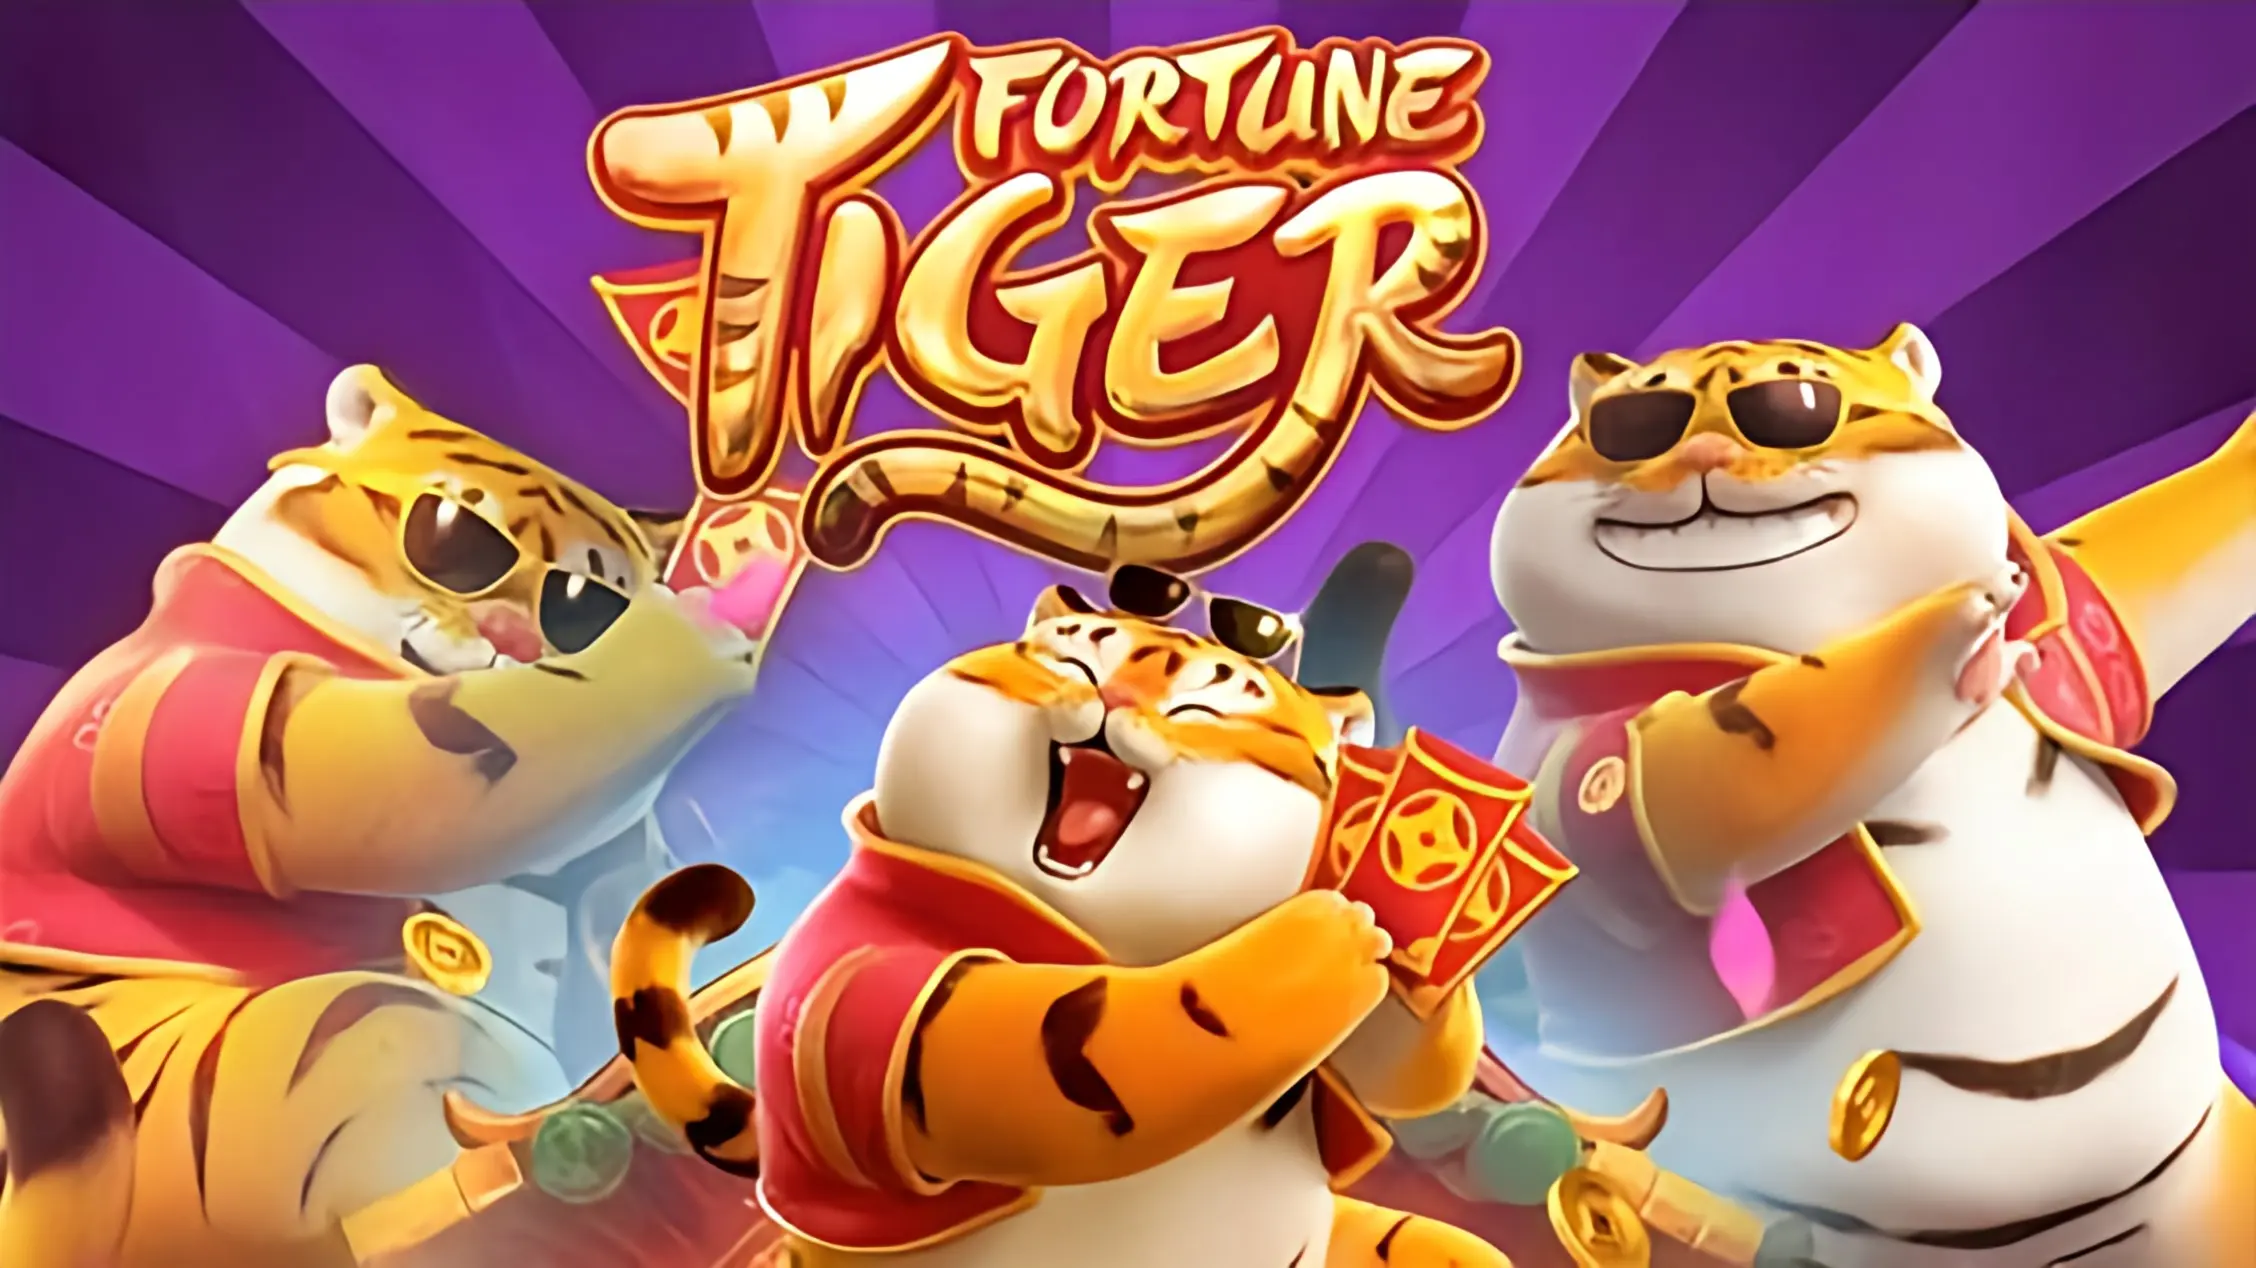 Fortune Tiger Slot Review